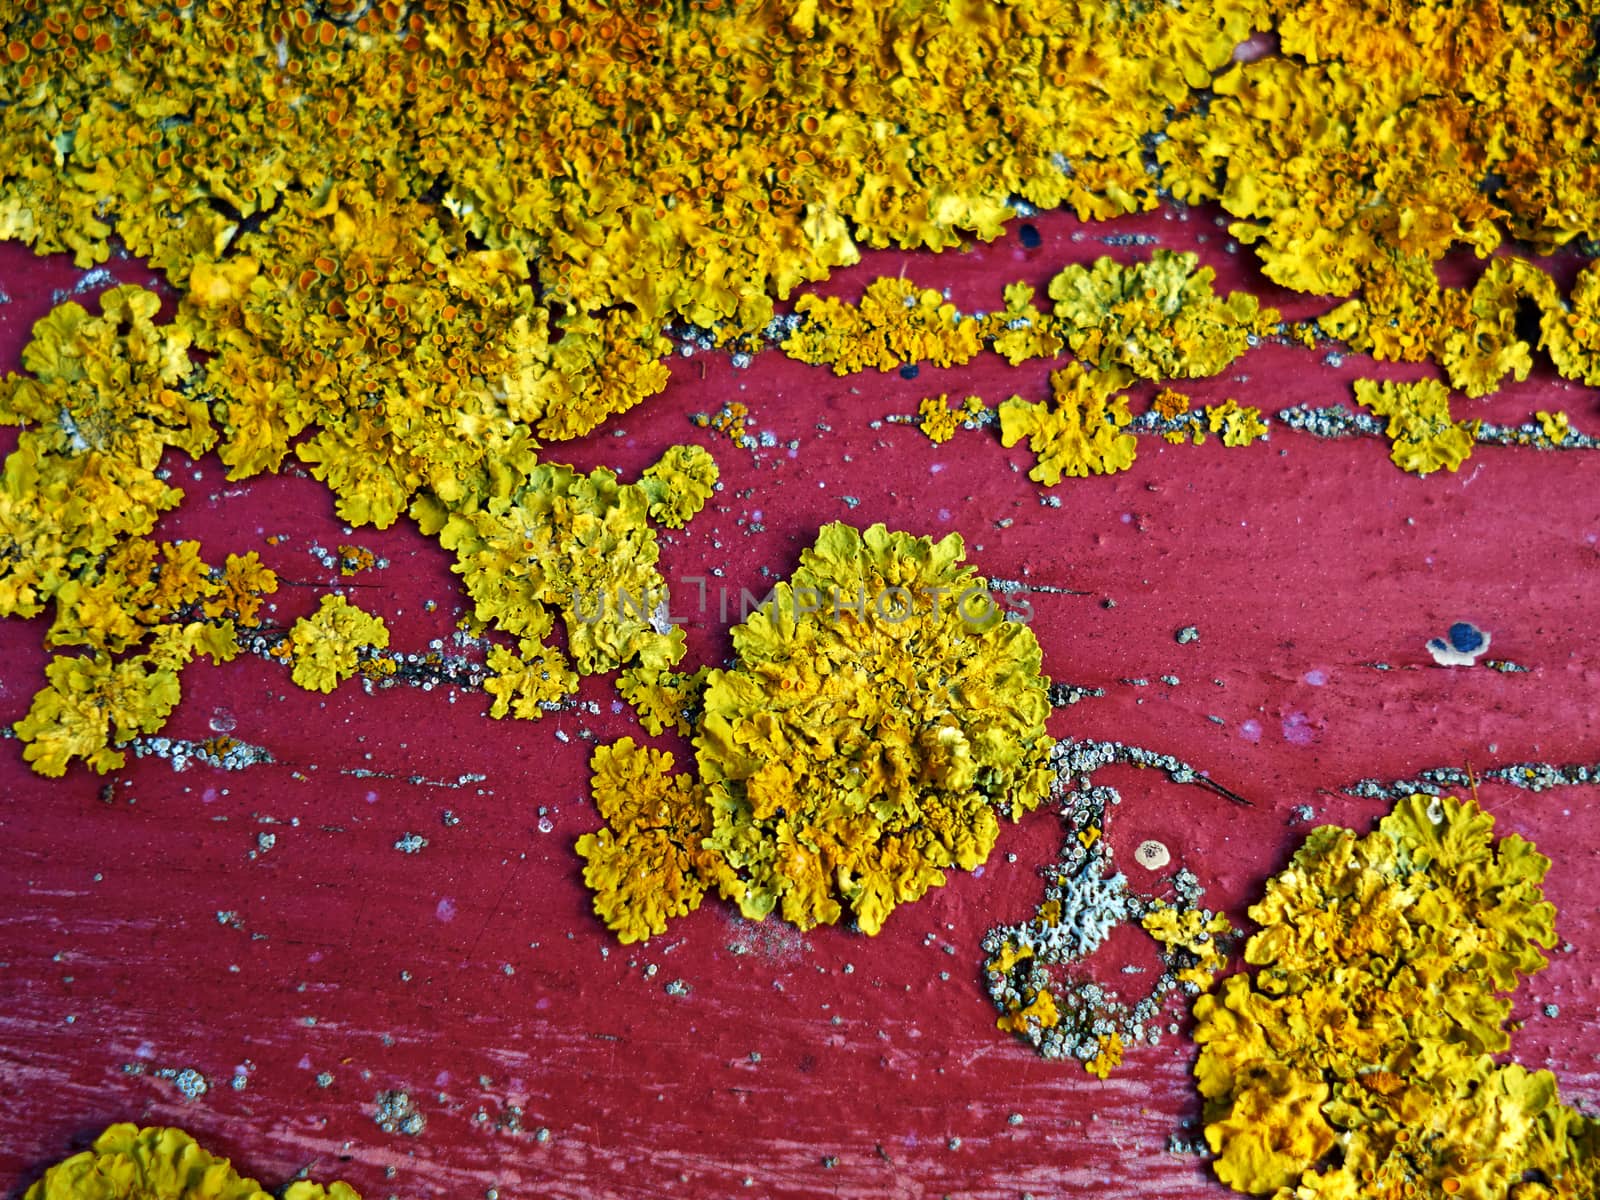 Lichen fungus growing on a red wooden board